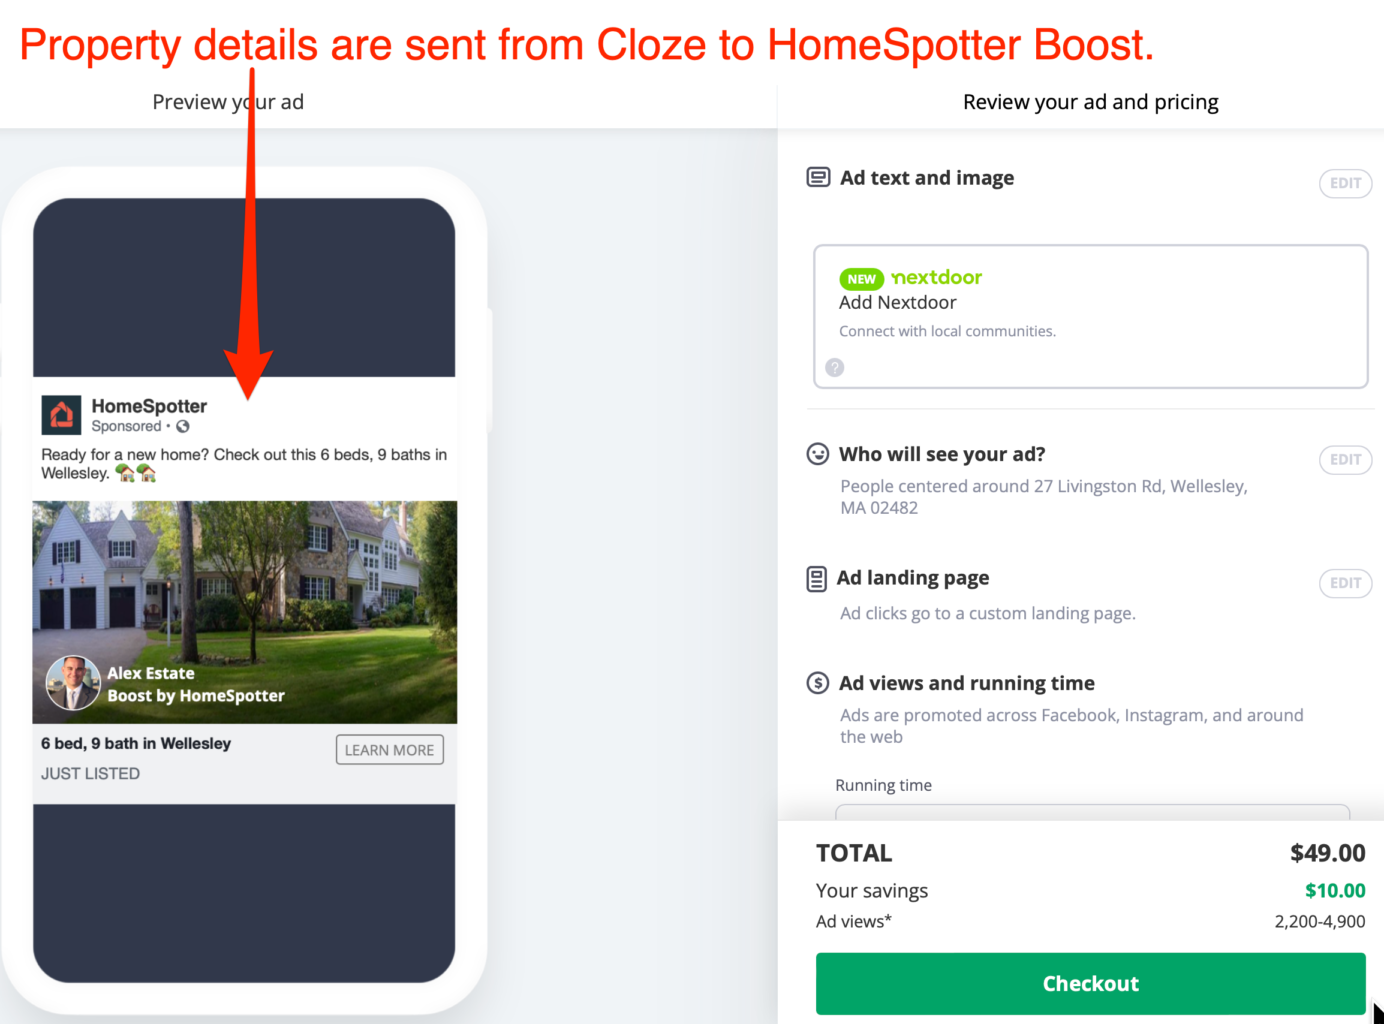 Property details are sent from Cloze to HomeSpotter Boost.